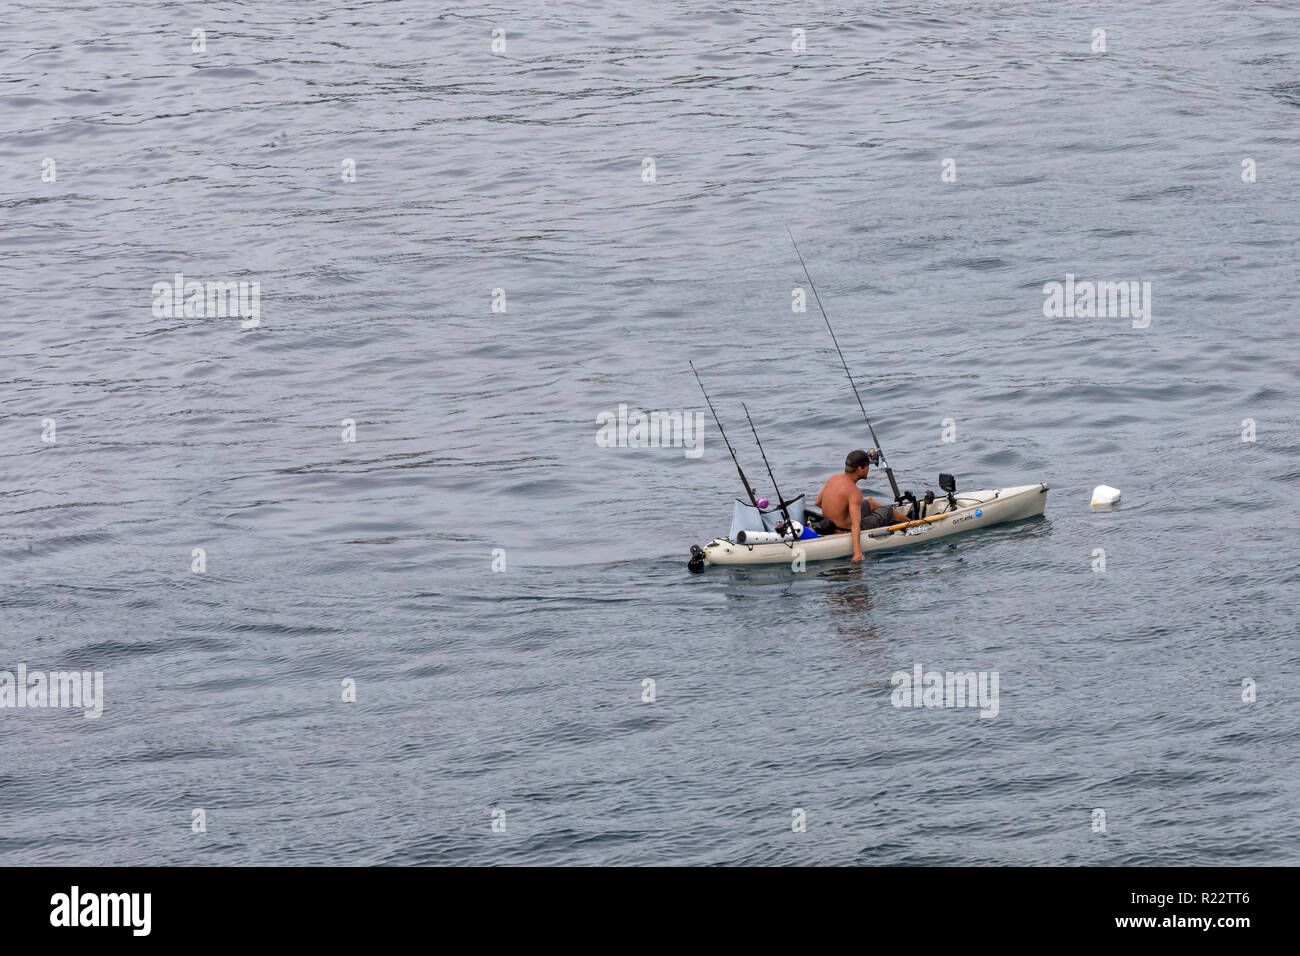 Ka Lae, Hawaii - A man fishes from a kayak near the southernmost point in the United States, also called South Point, on Hawaii's Big Island. Stock Photo